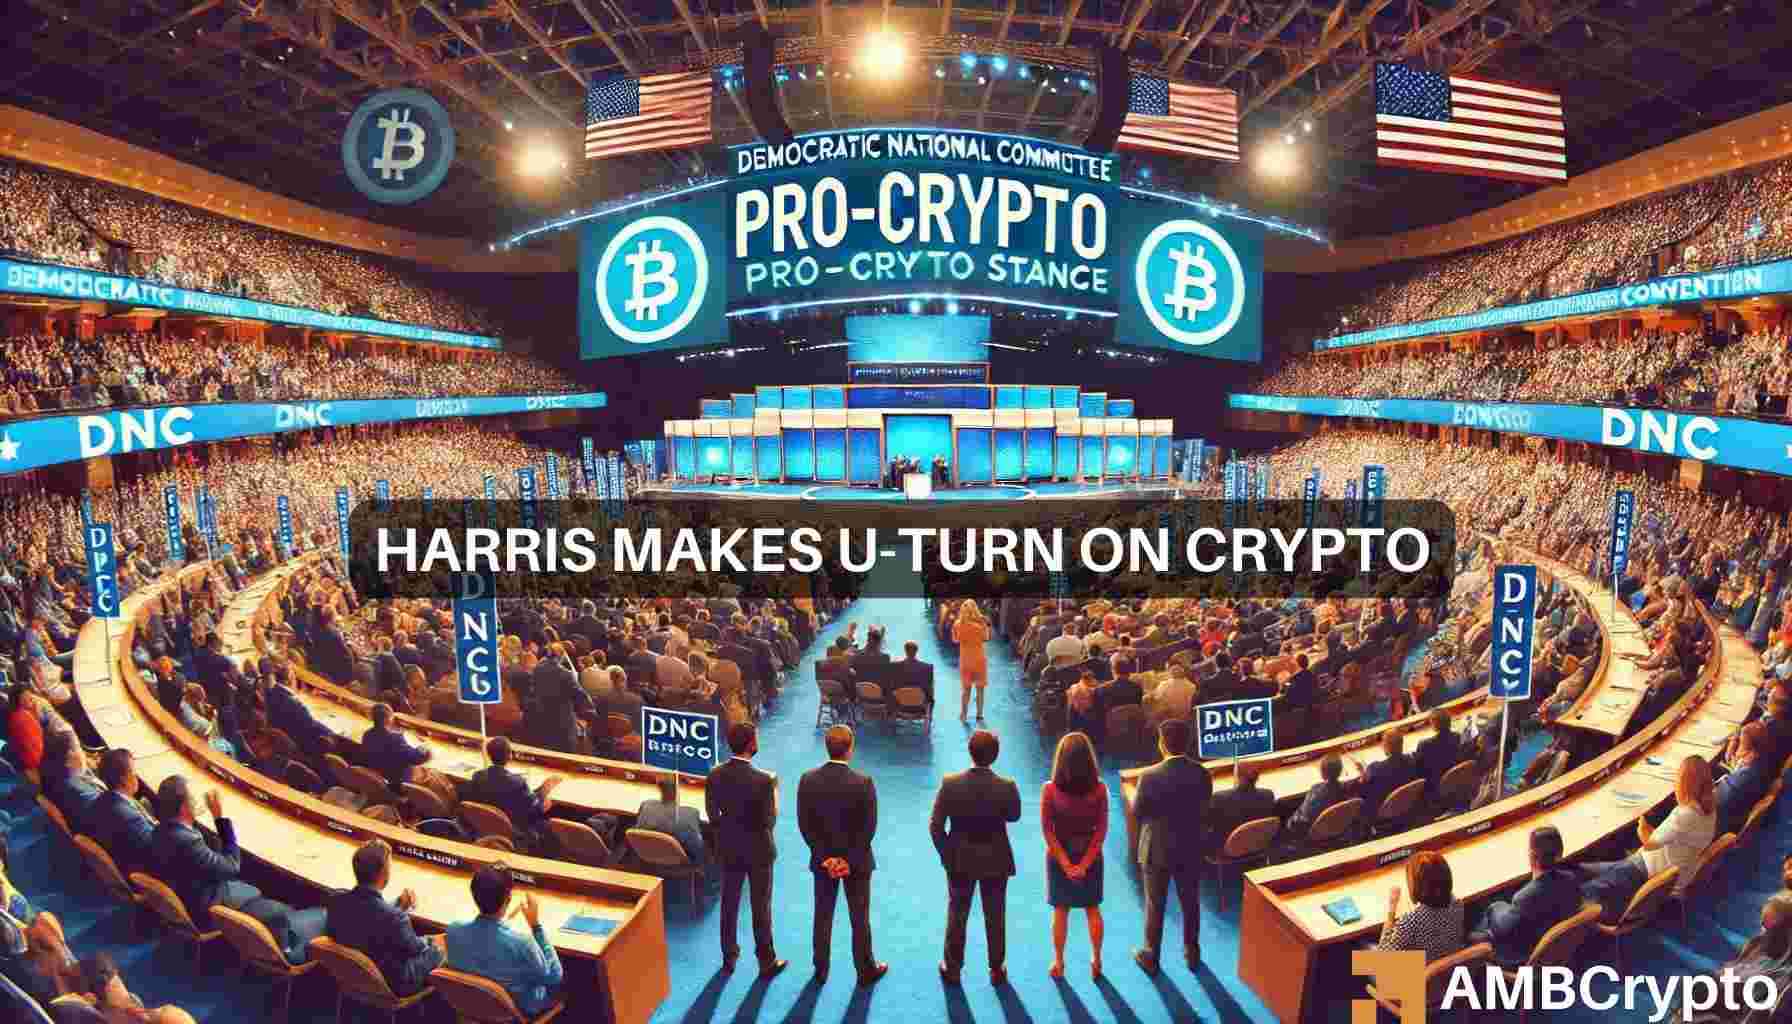 Kamala Harris seeks to ‘reset’ crypto relations: What’s behind the move?